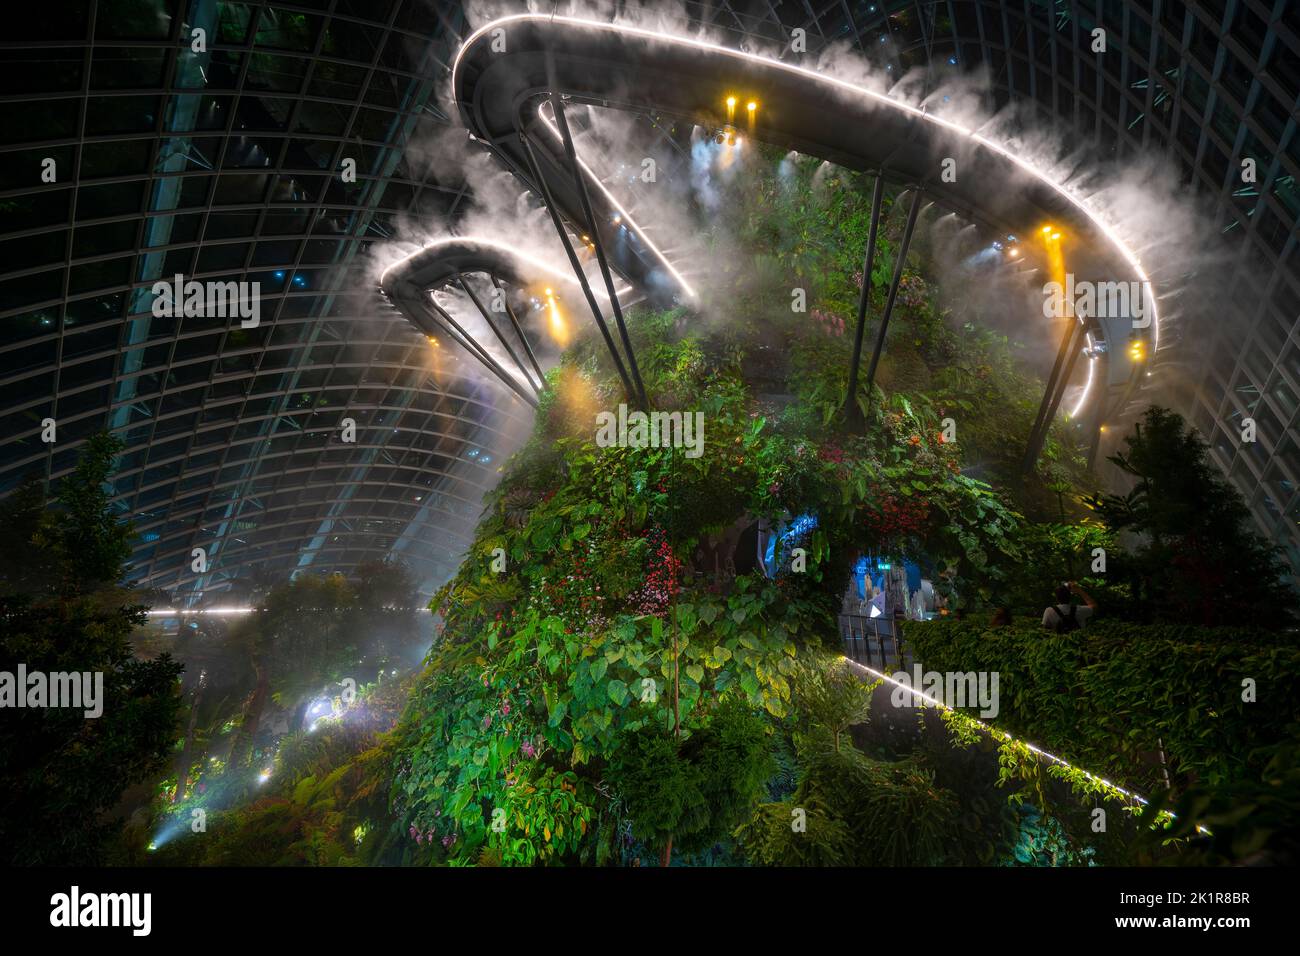 Night view of the 42-metre Cloud Mountain in the Cloud Forest, one of the two vast conservatories in the Gardens by the Bay, Marina Bay Singapore Stock Photo